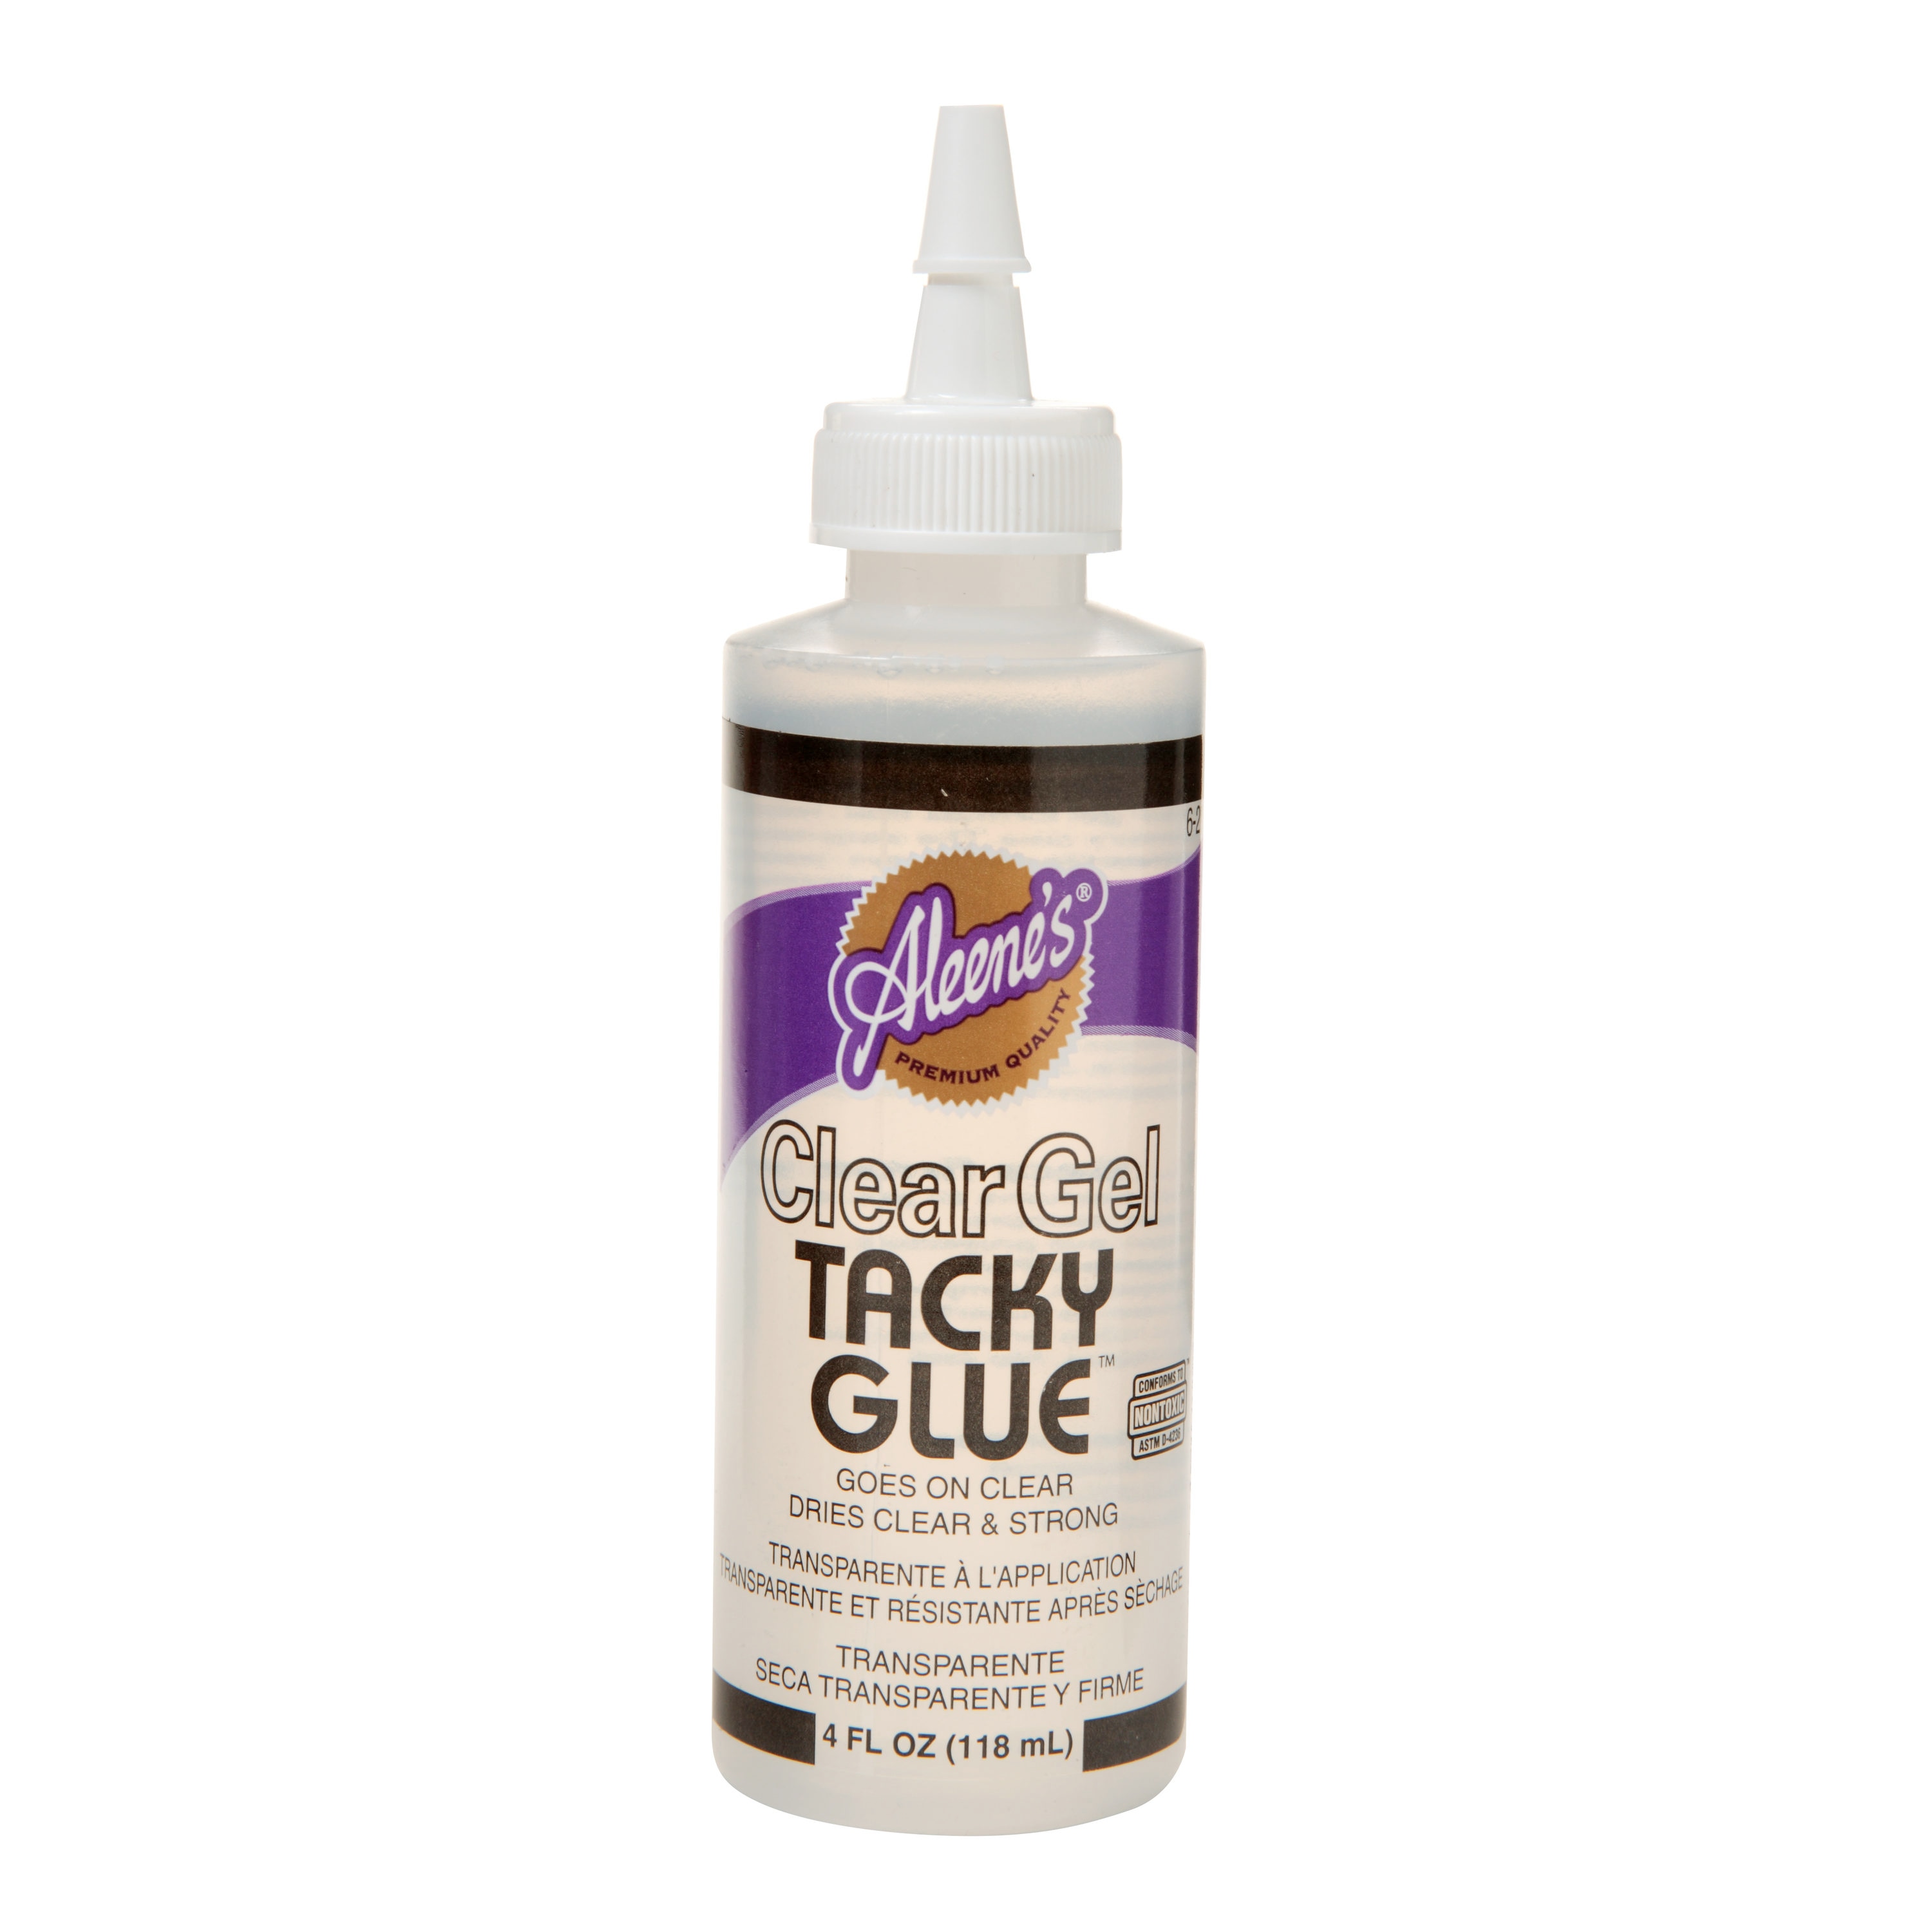 Elmer's Glue-All Multi-Purpose Non-Toxic Glue, 4 Oz Squeeze Bottle, White  And Dries Clear : Learning: Classroom 